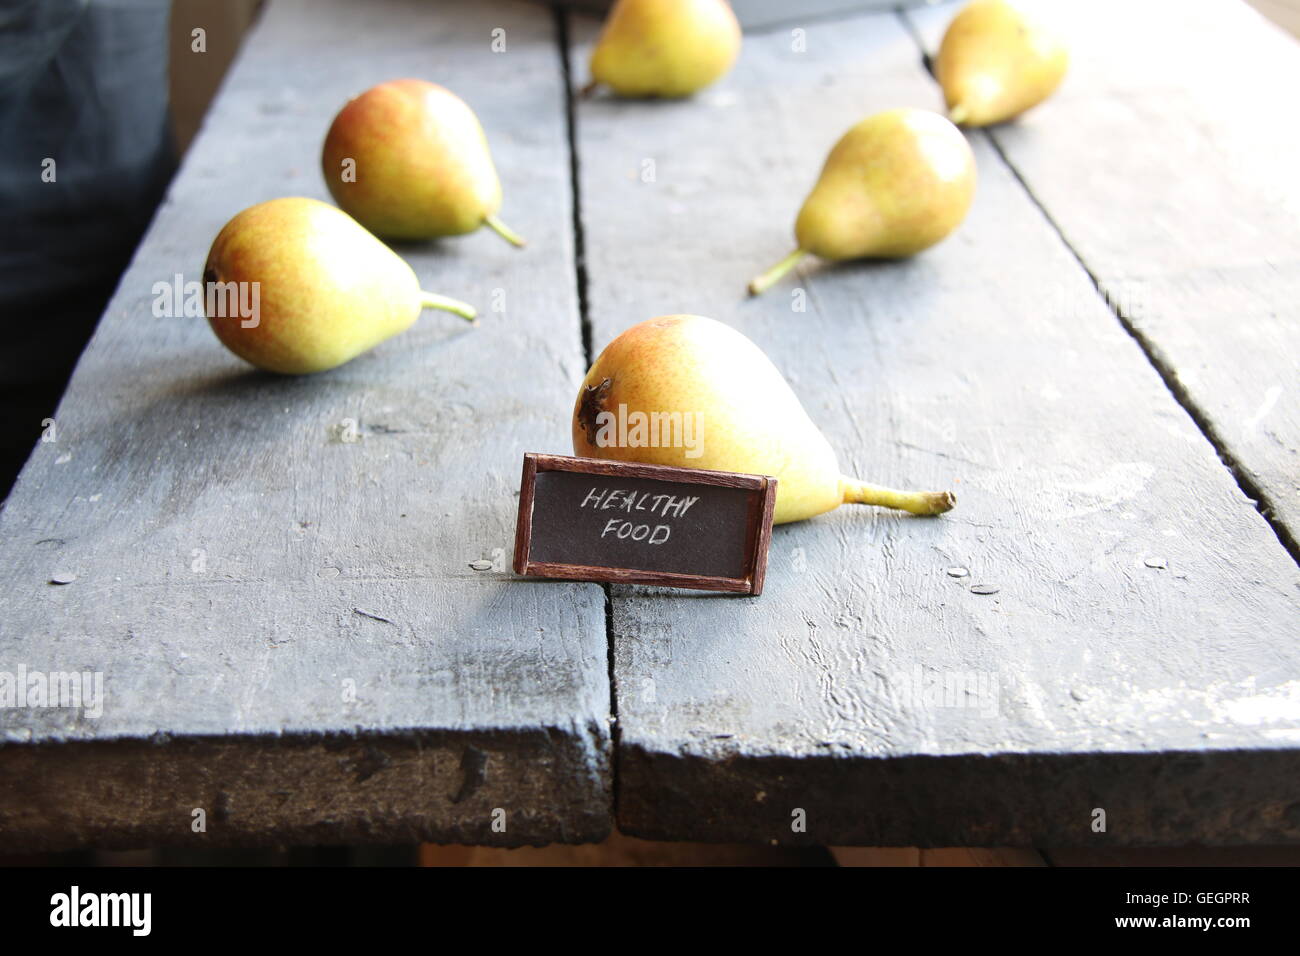 healthy food text and Juicy flavorful pears Stock Photo